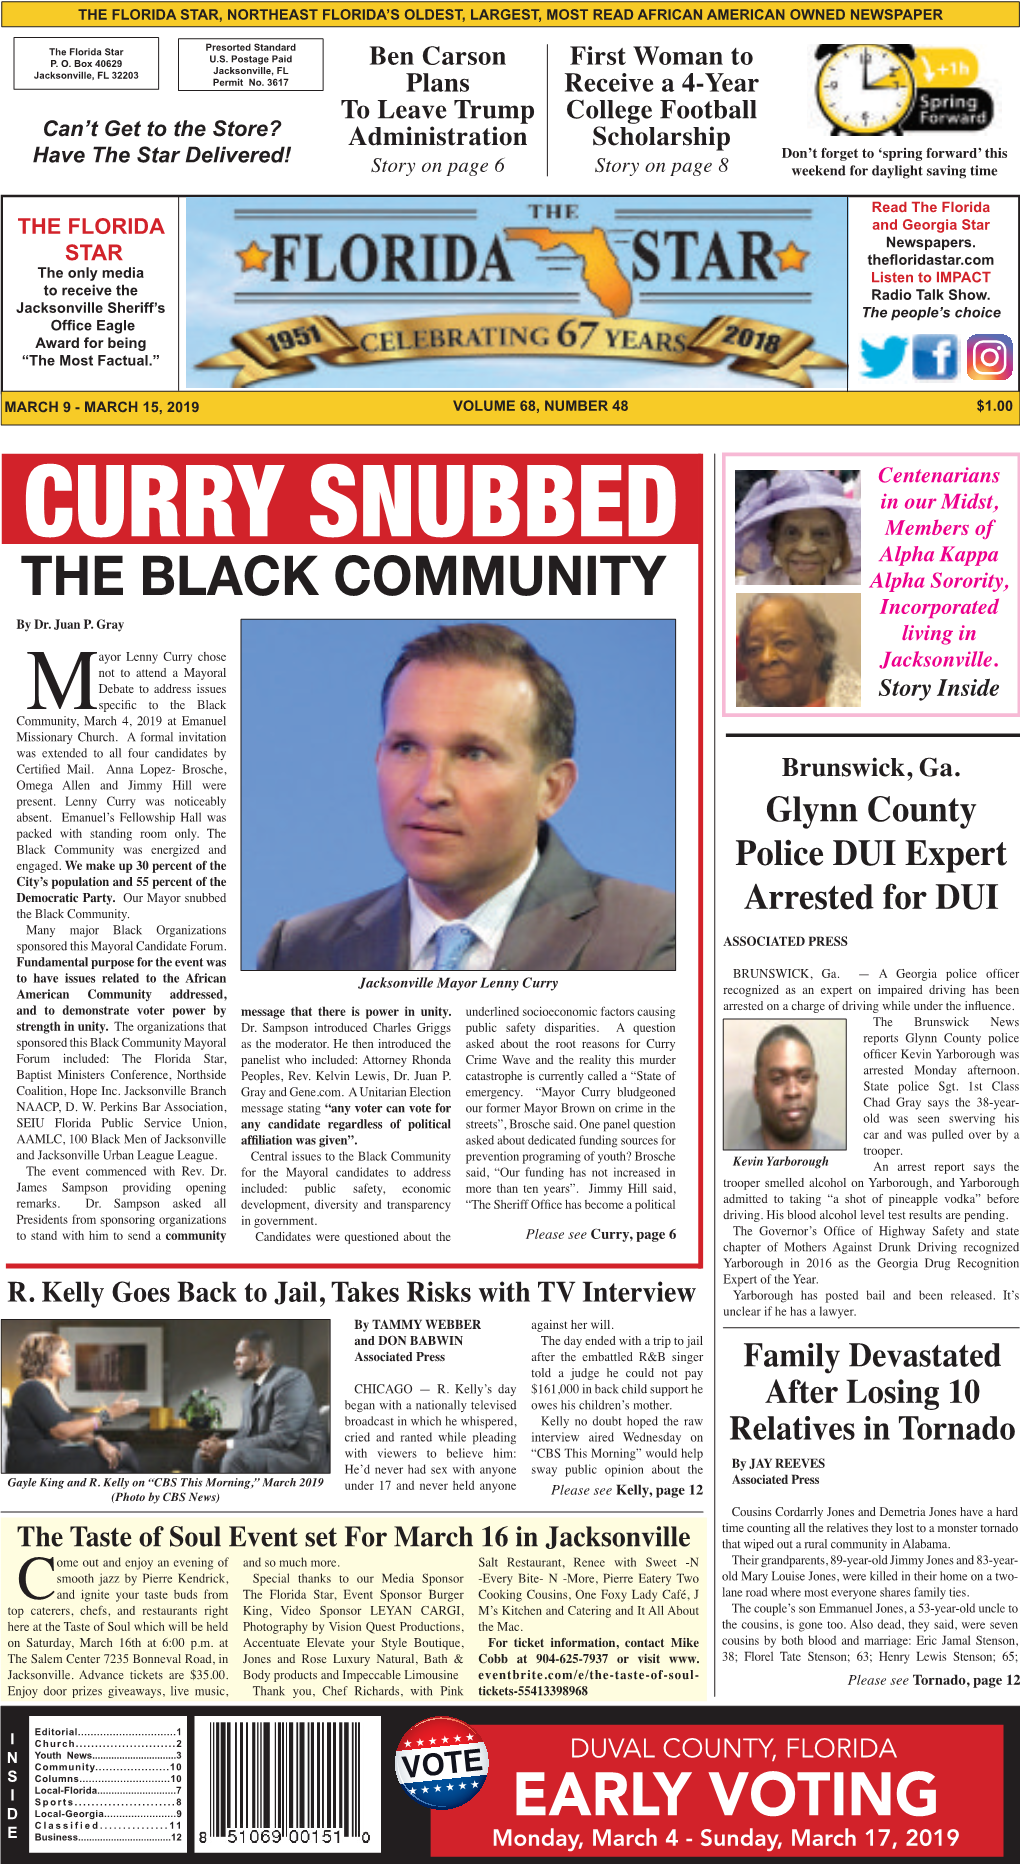 CURRY SNUBBED Alpha Kappa Alpha Sorority, the BLACK COMMUNITY Incorporated by Dr